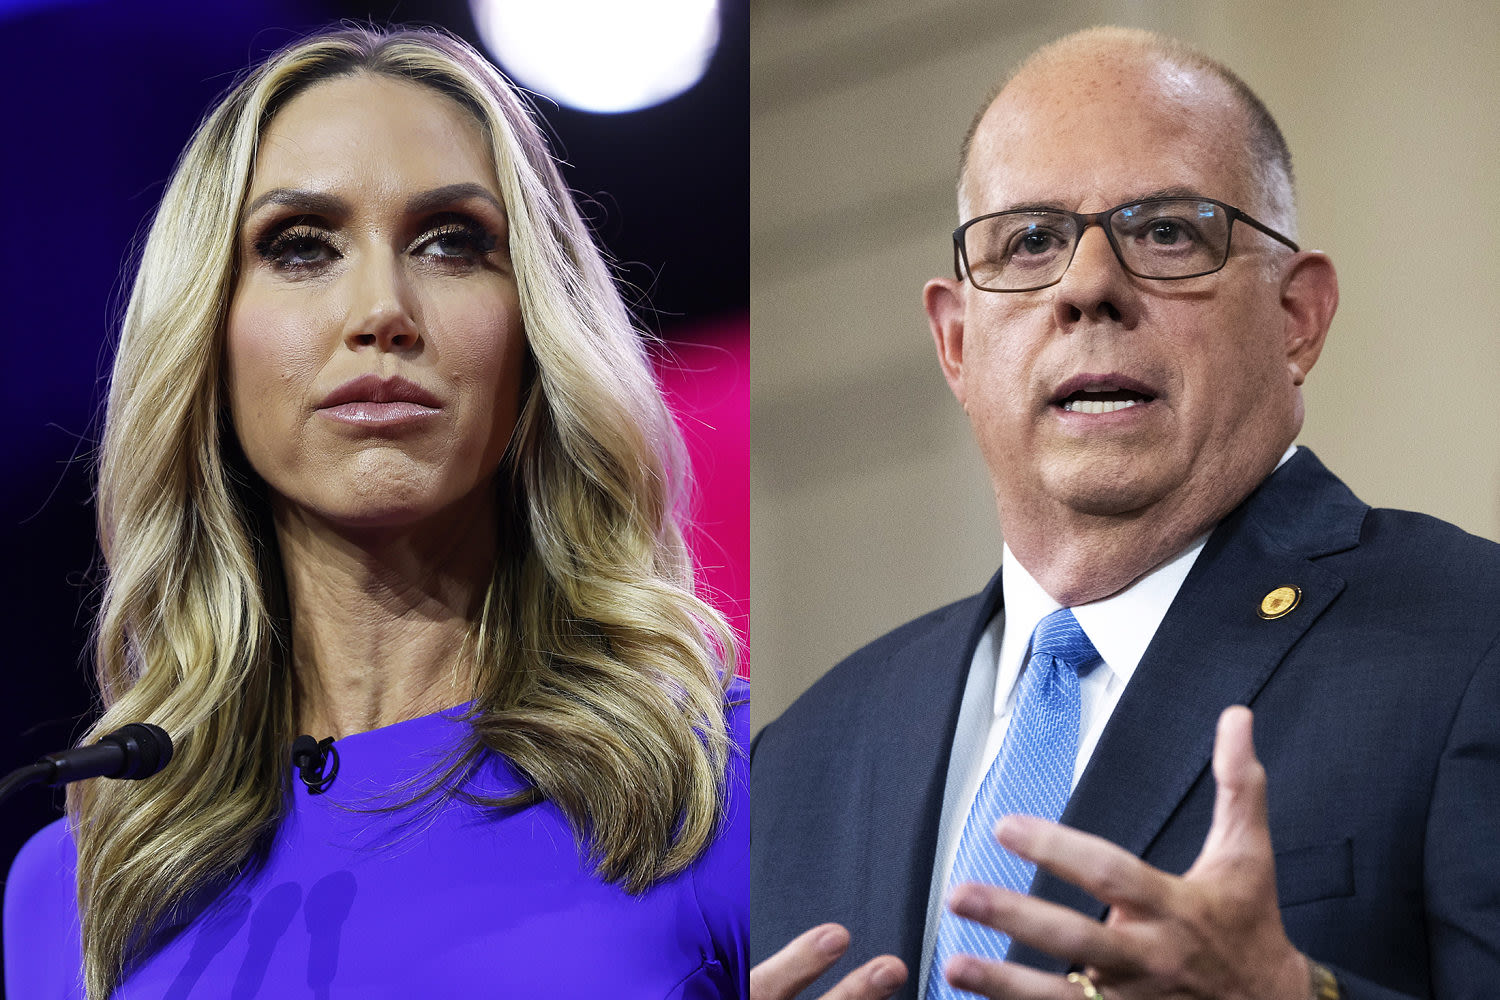 Opinion | The real reason Lara Trump has knives out for Larry Hogan